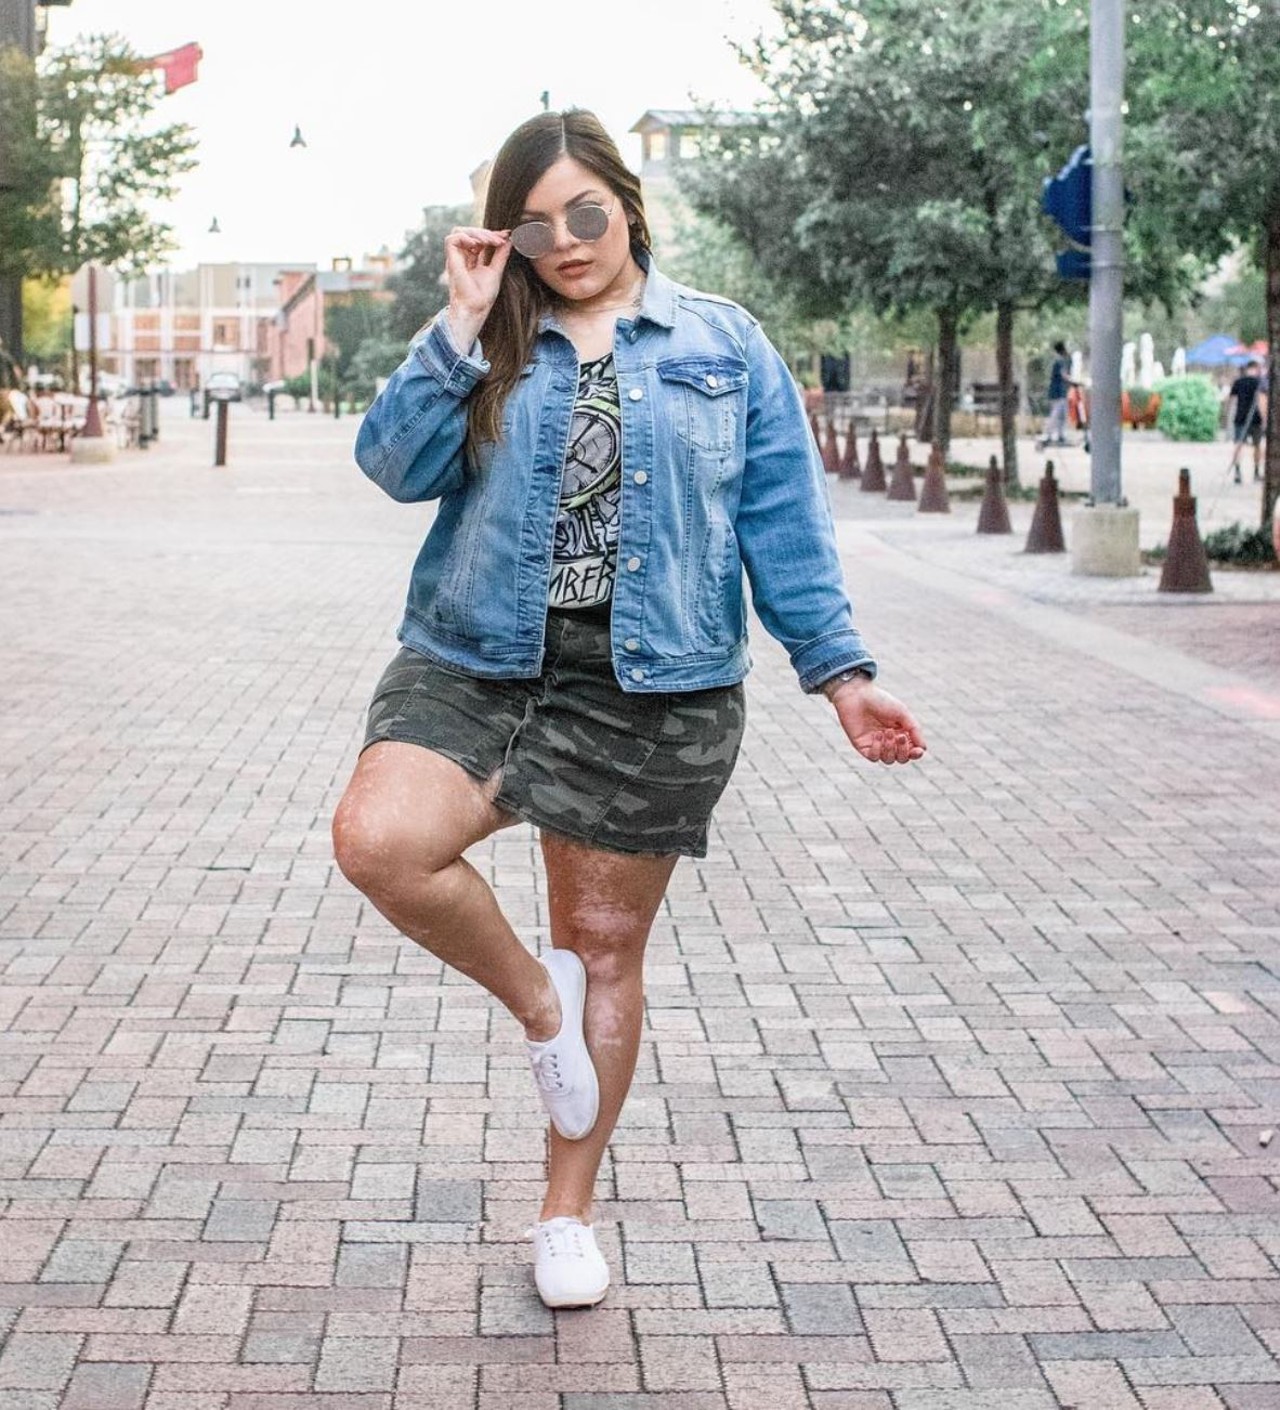 Darlene Marie
Darlene Marie is a vlogger here in the Alamo City, and she’s proud of it. Some of her videos include mukbangs of Tex-Mex food, while others are about Fiesta, and others still are crime mysteries. She also brings makeup looks and beauty tips to the table.
Photo via Instagram / xodarlenemariee